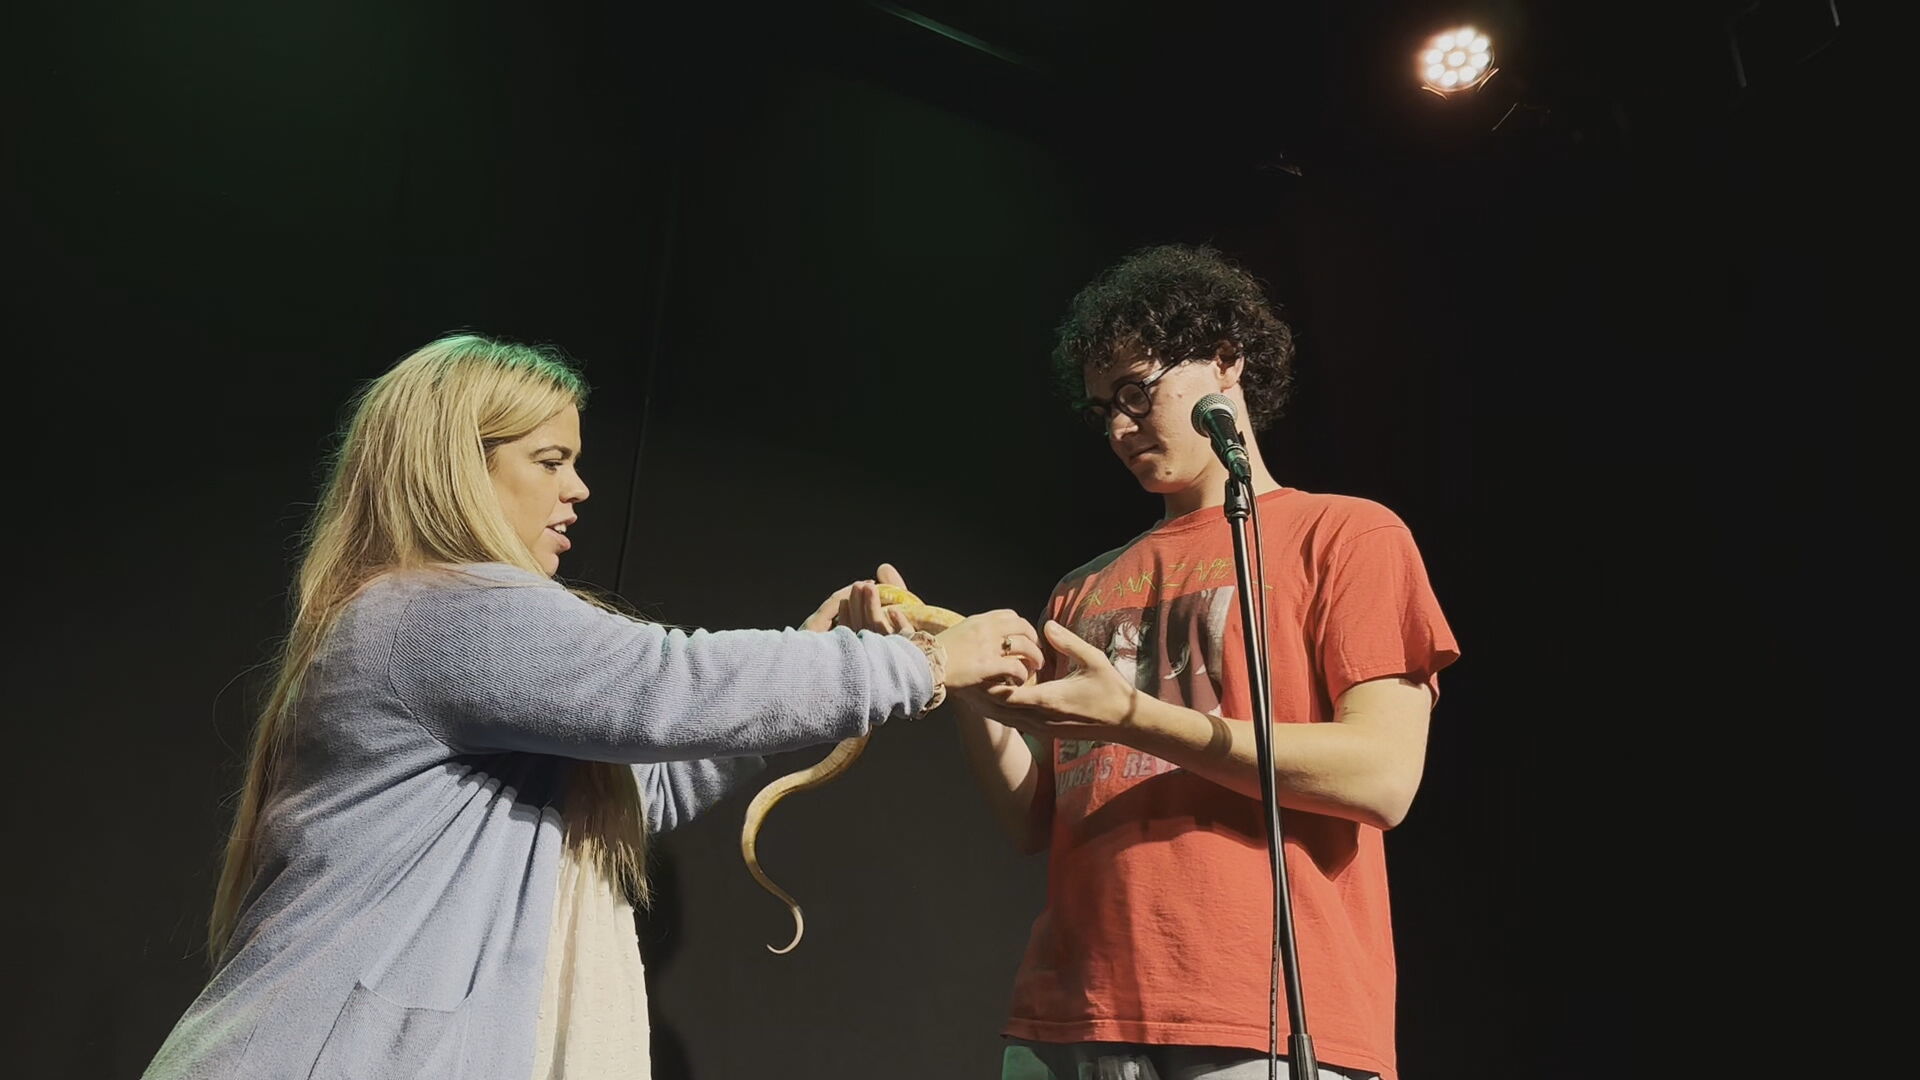 Danielle assisting Charlie on stage with a snake during his comedy set. 